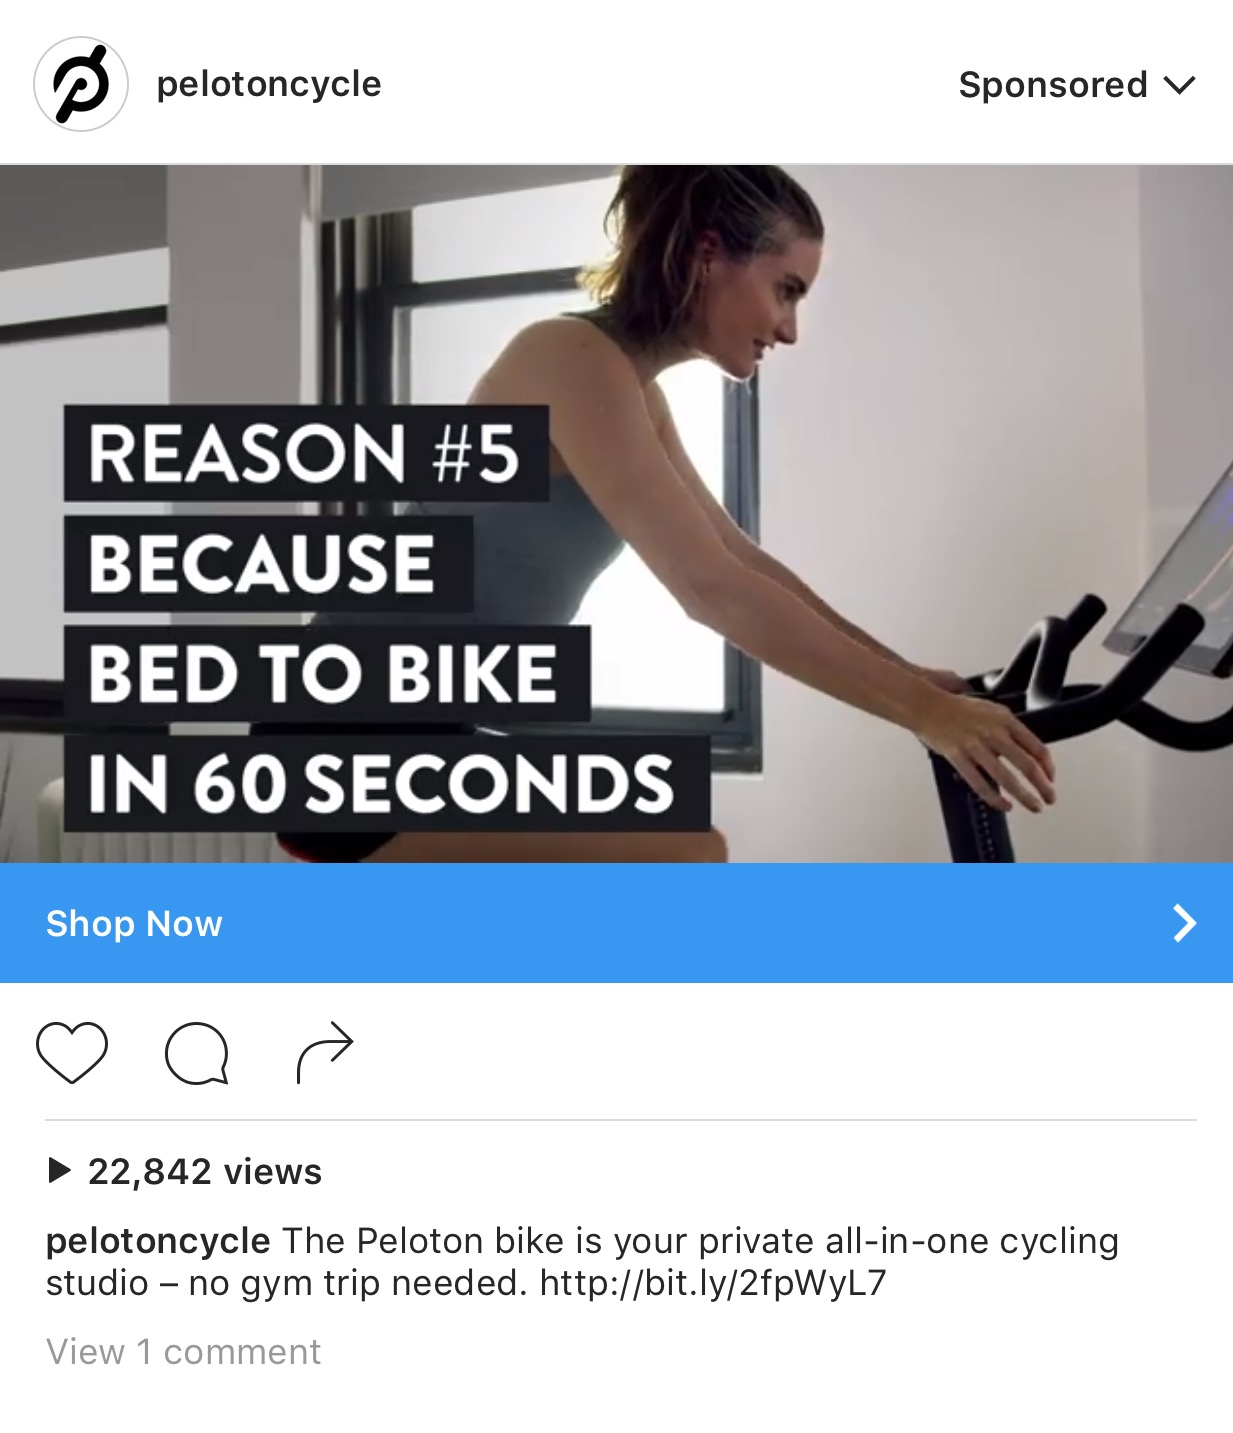 Example of an Instagram ad by Peloton Cycle.